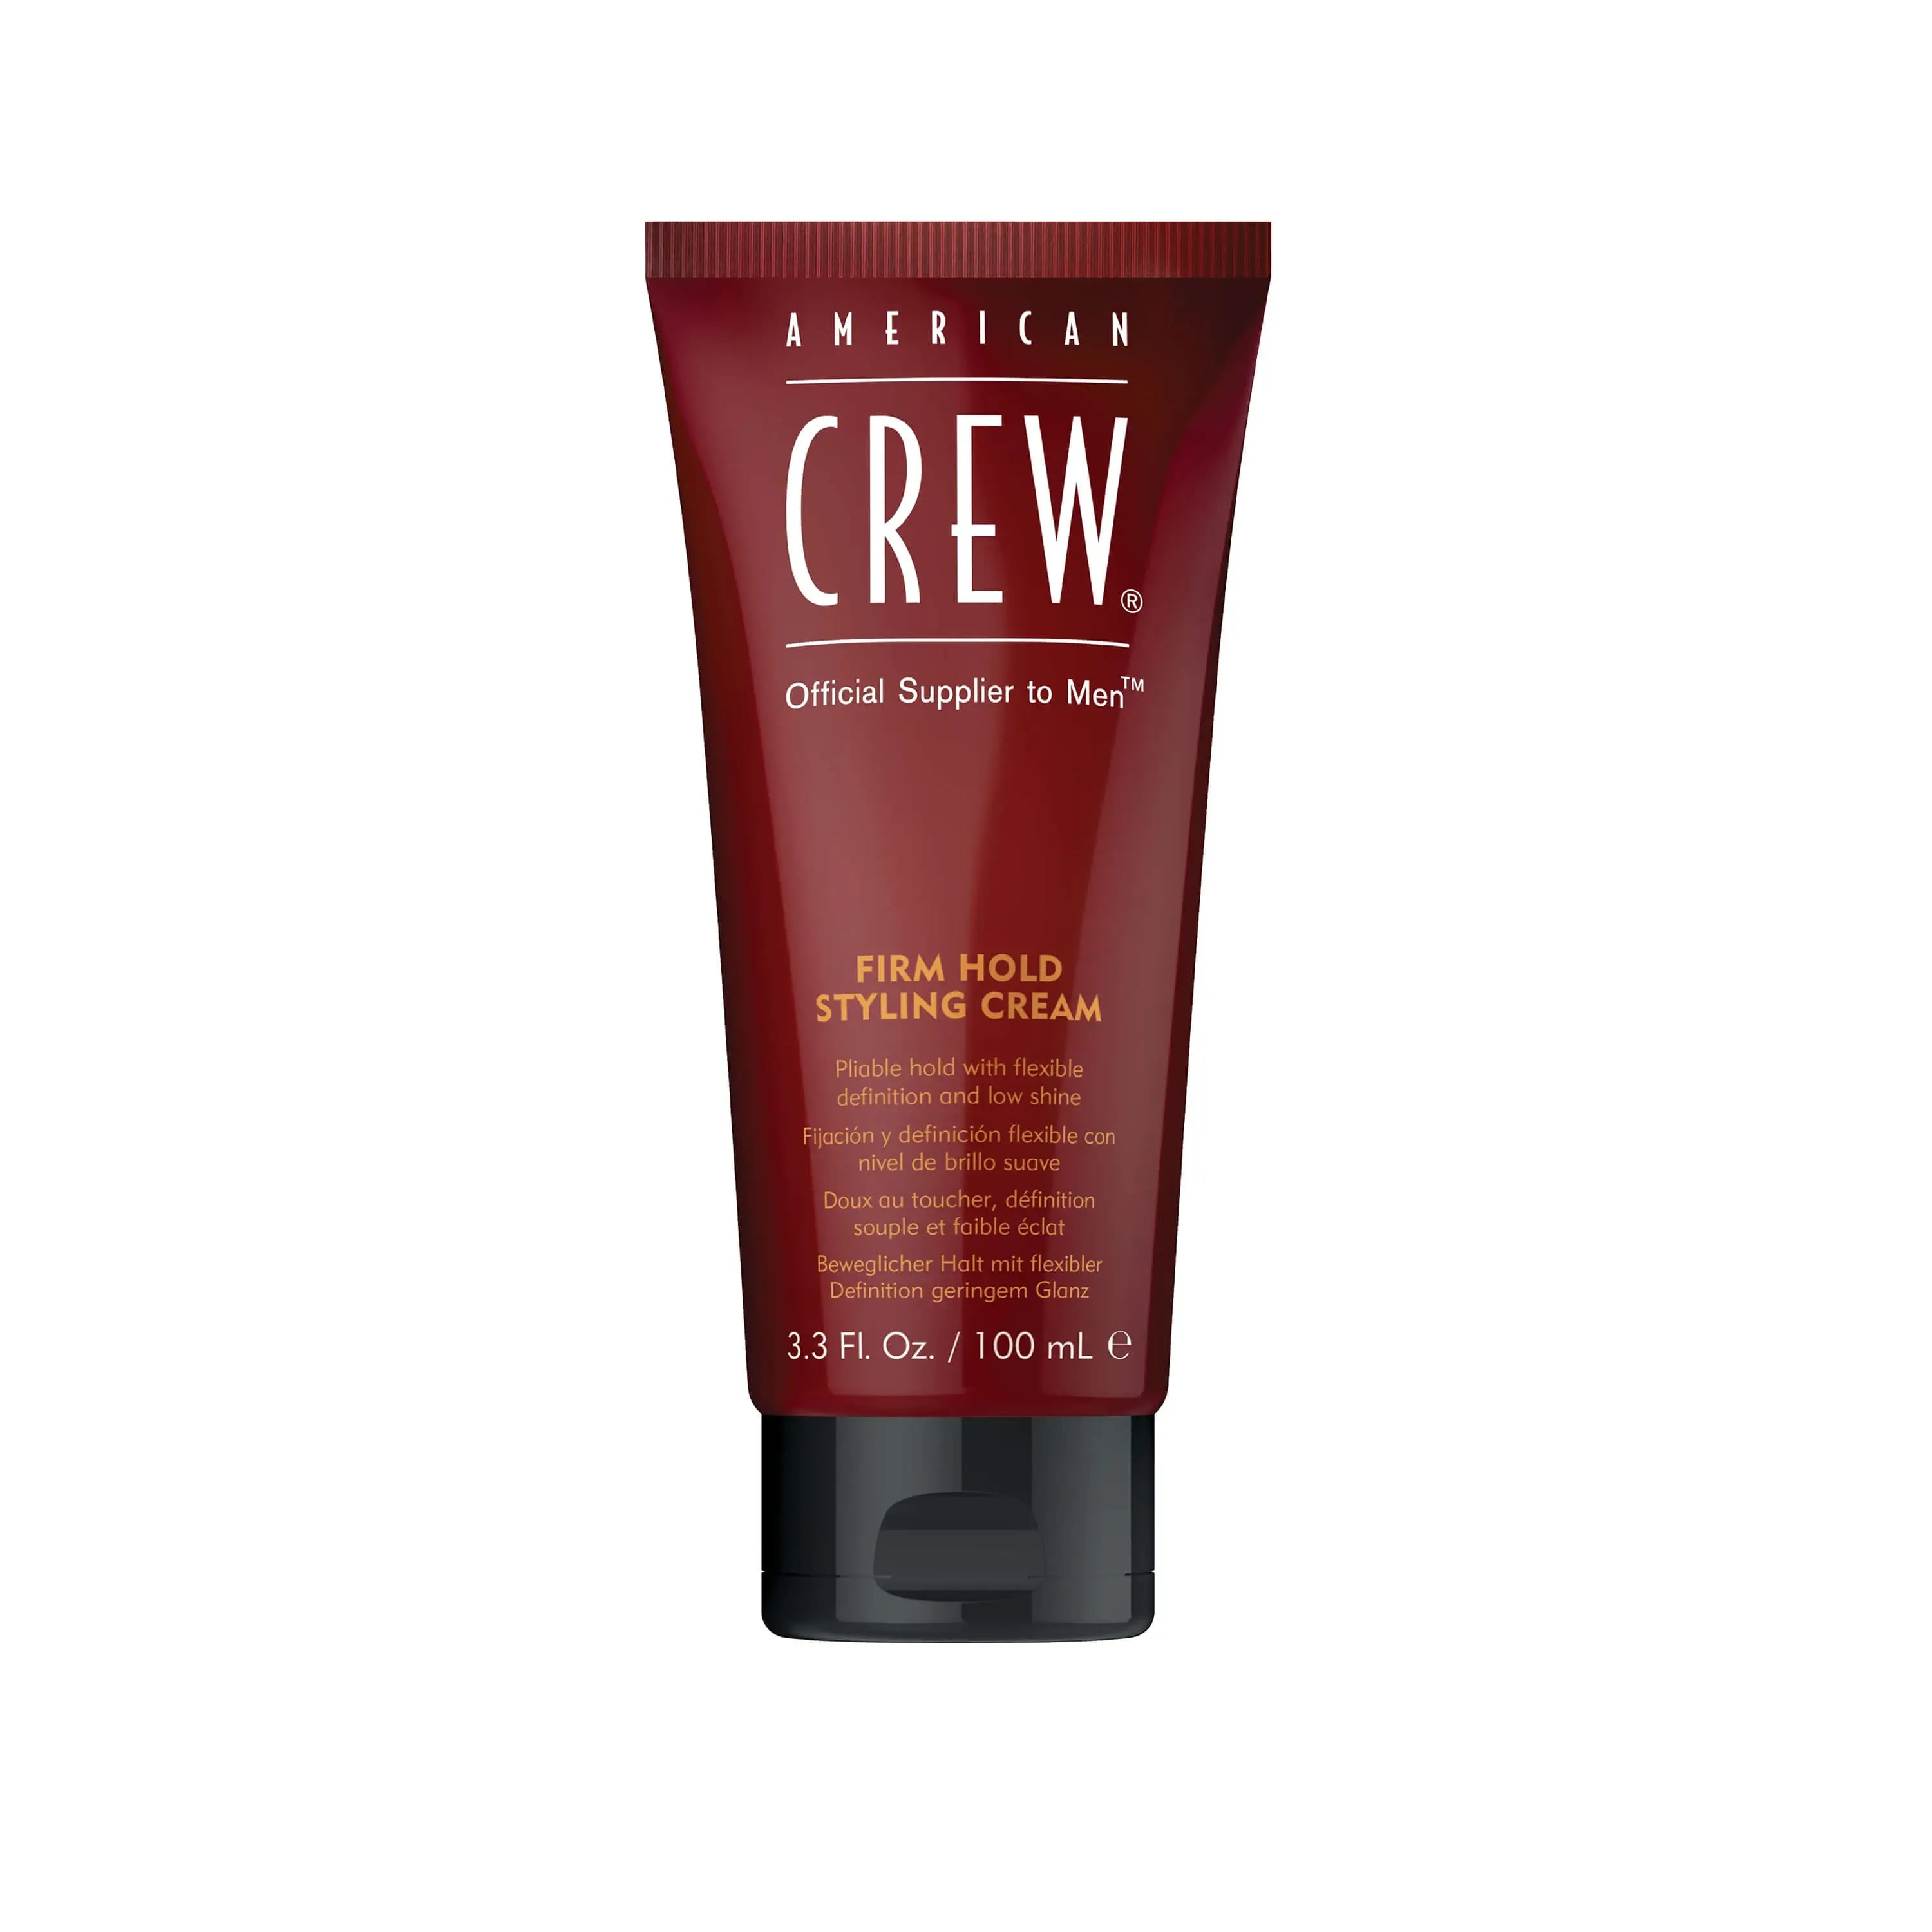 Firm Hold Styling Cream Crew American 